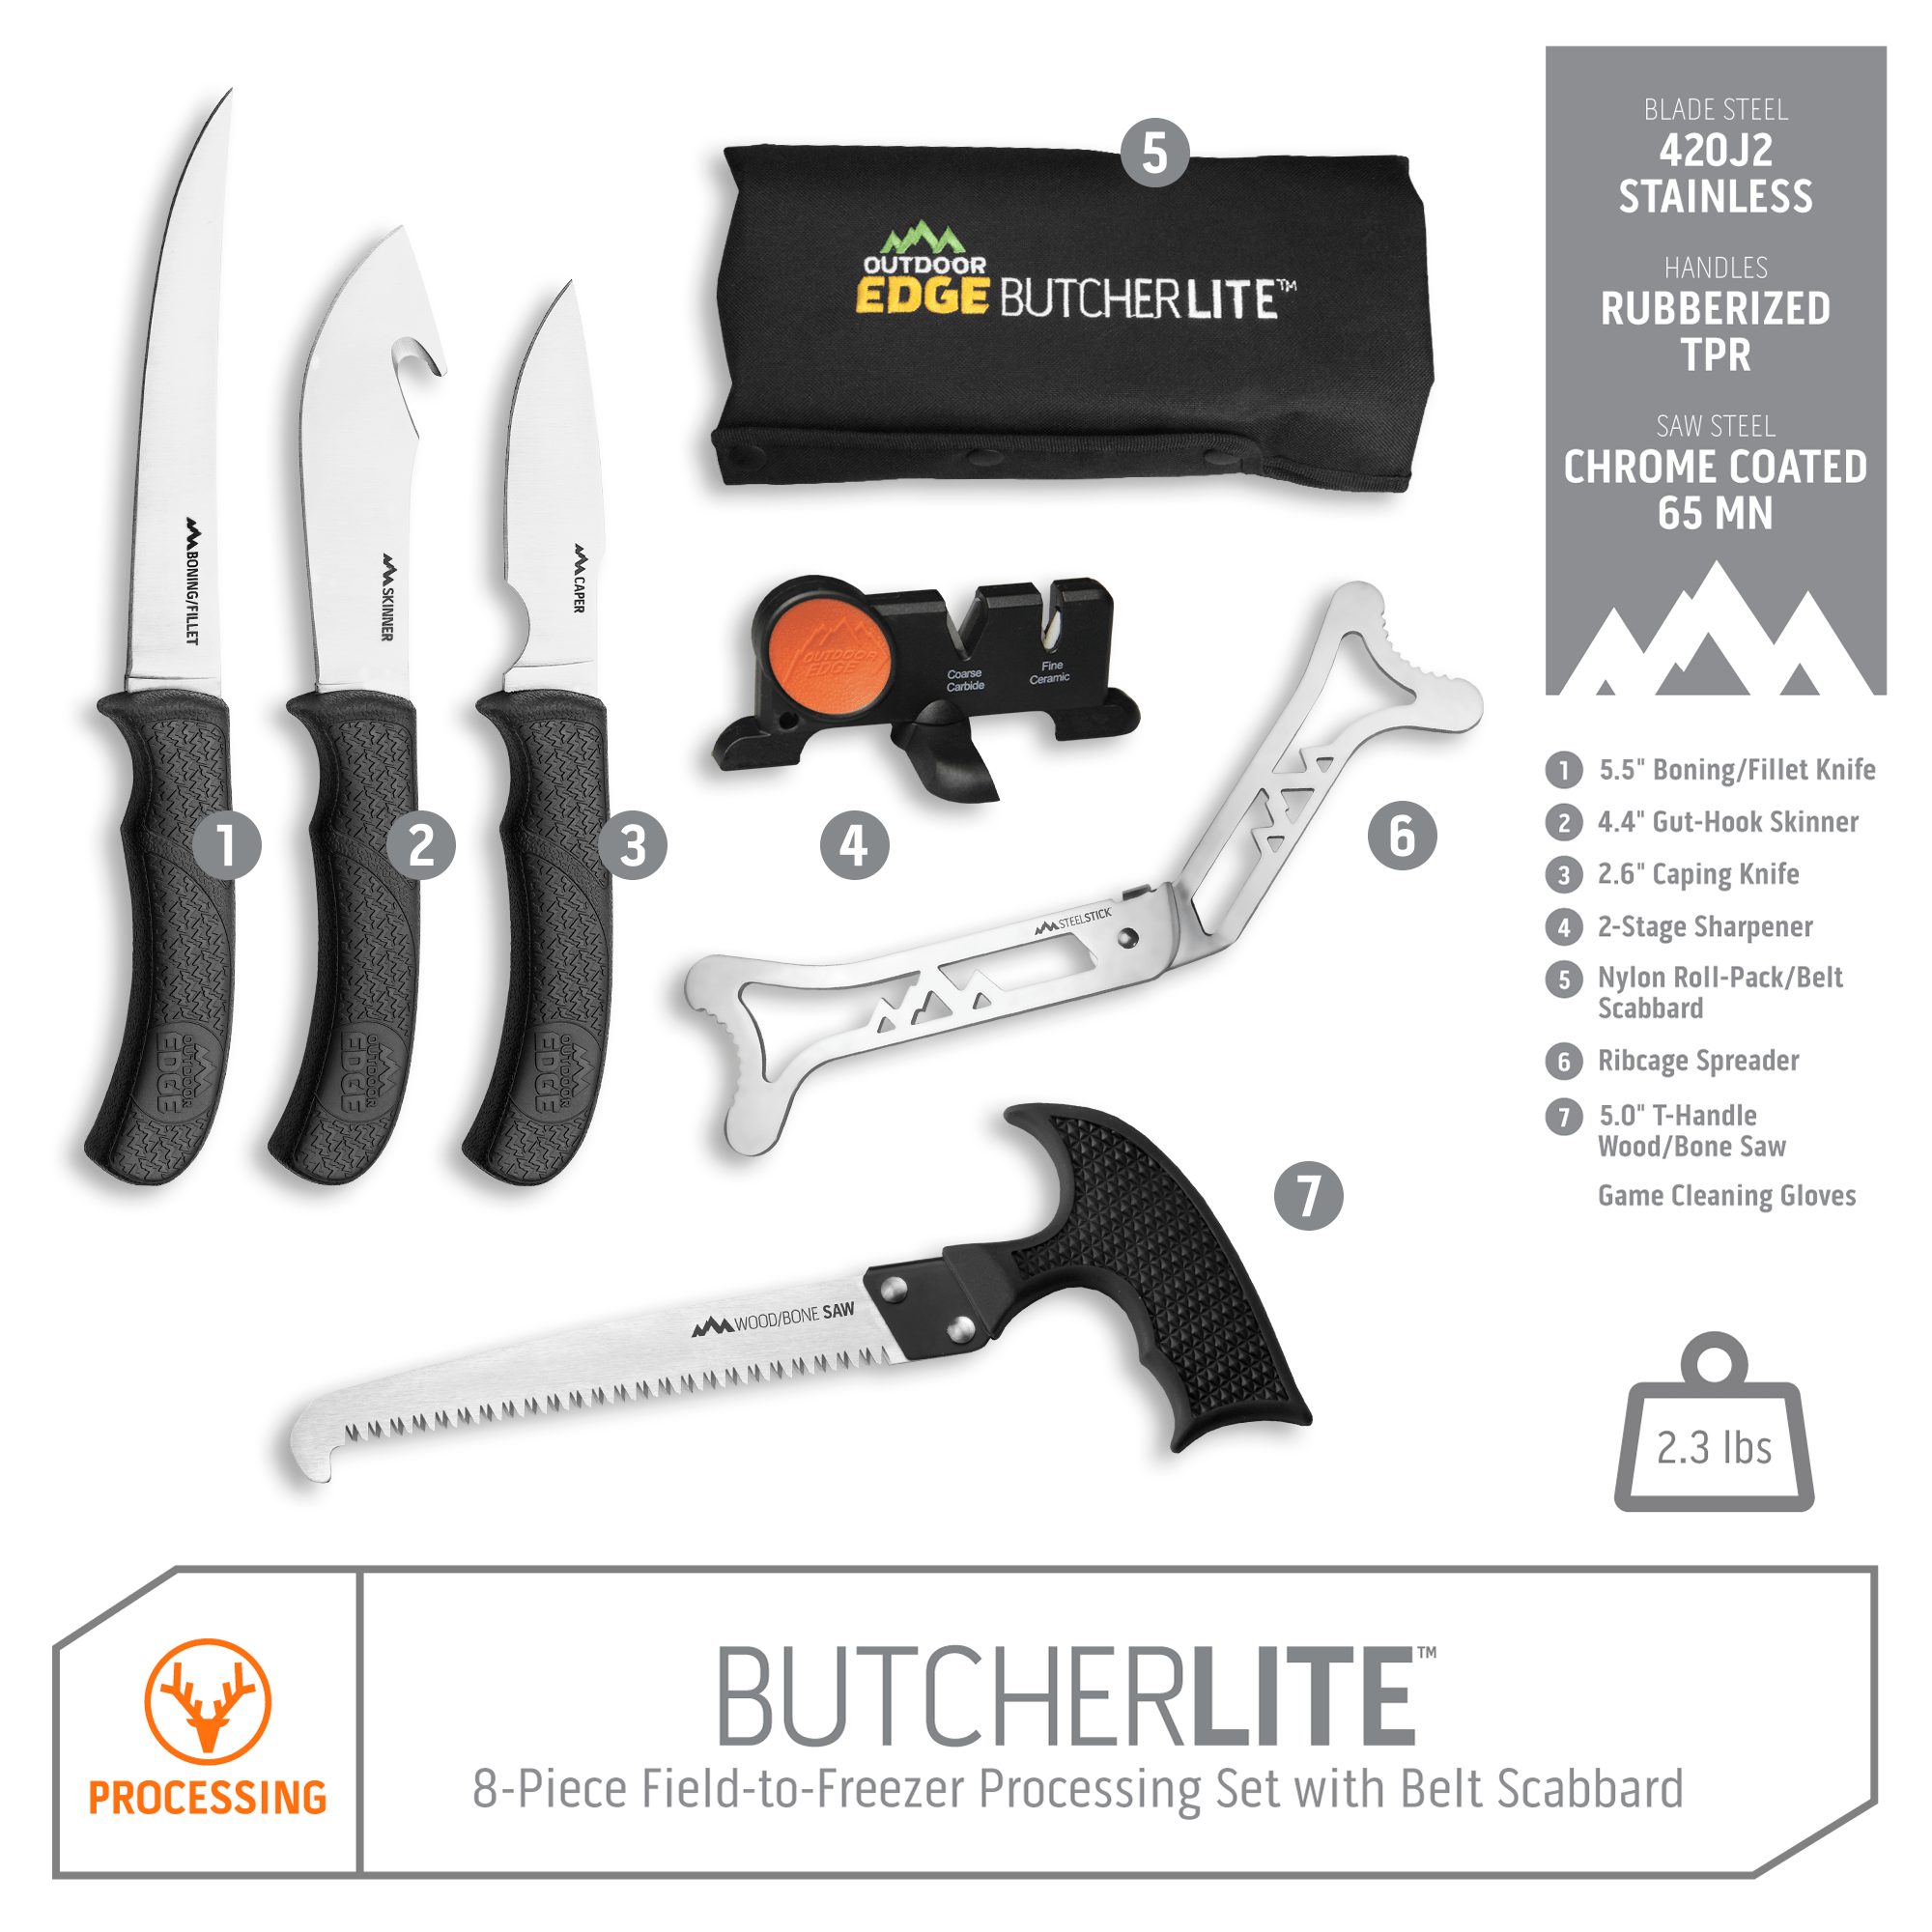 Outfitter™  Complete Field Dressing and Home Processing Set for